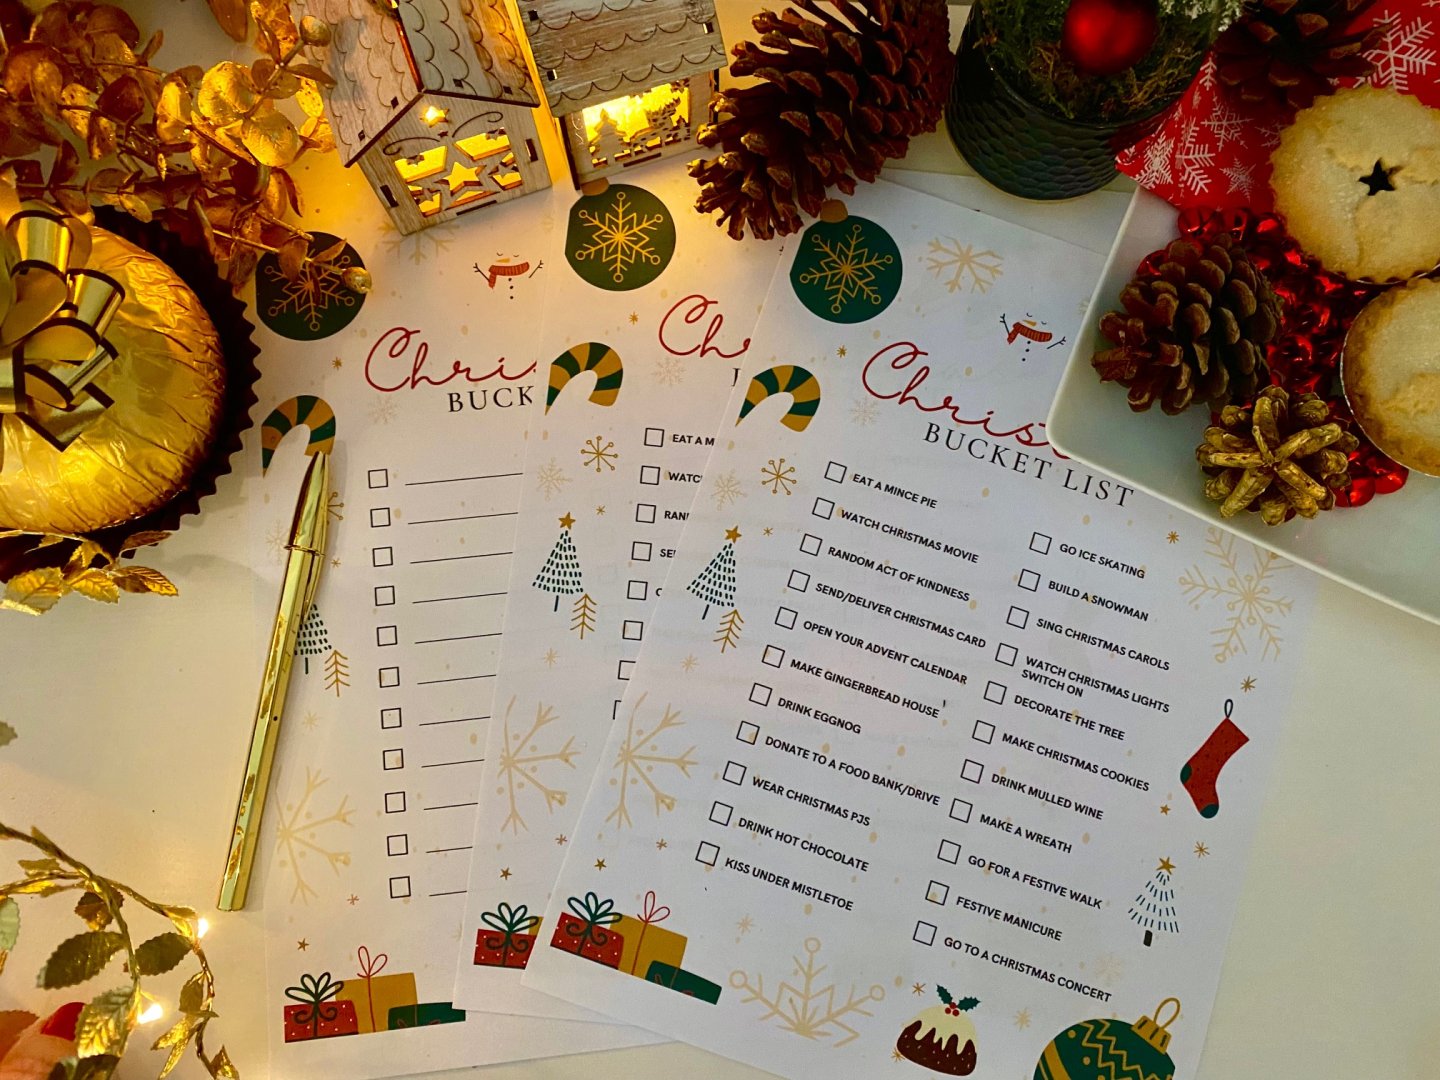 3 Christmas bucket list printable sheets on a table with gold pen, mince pies and other festive decorations